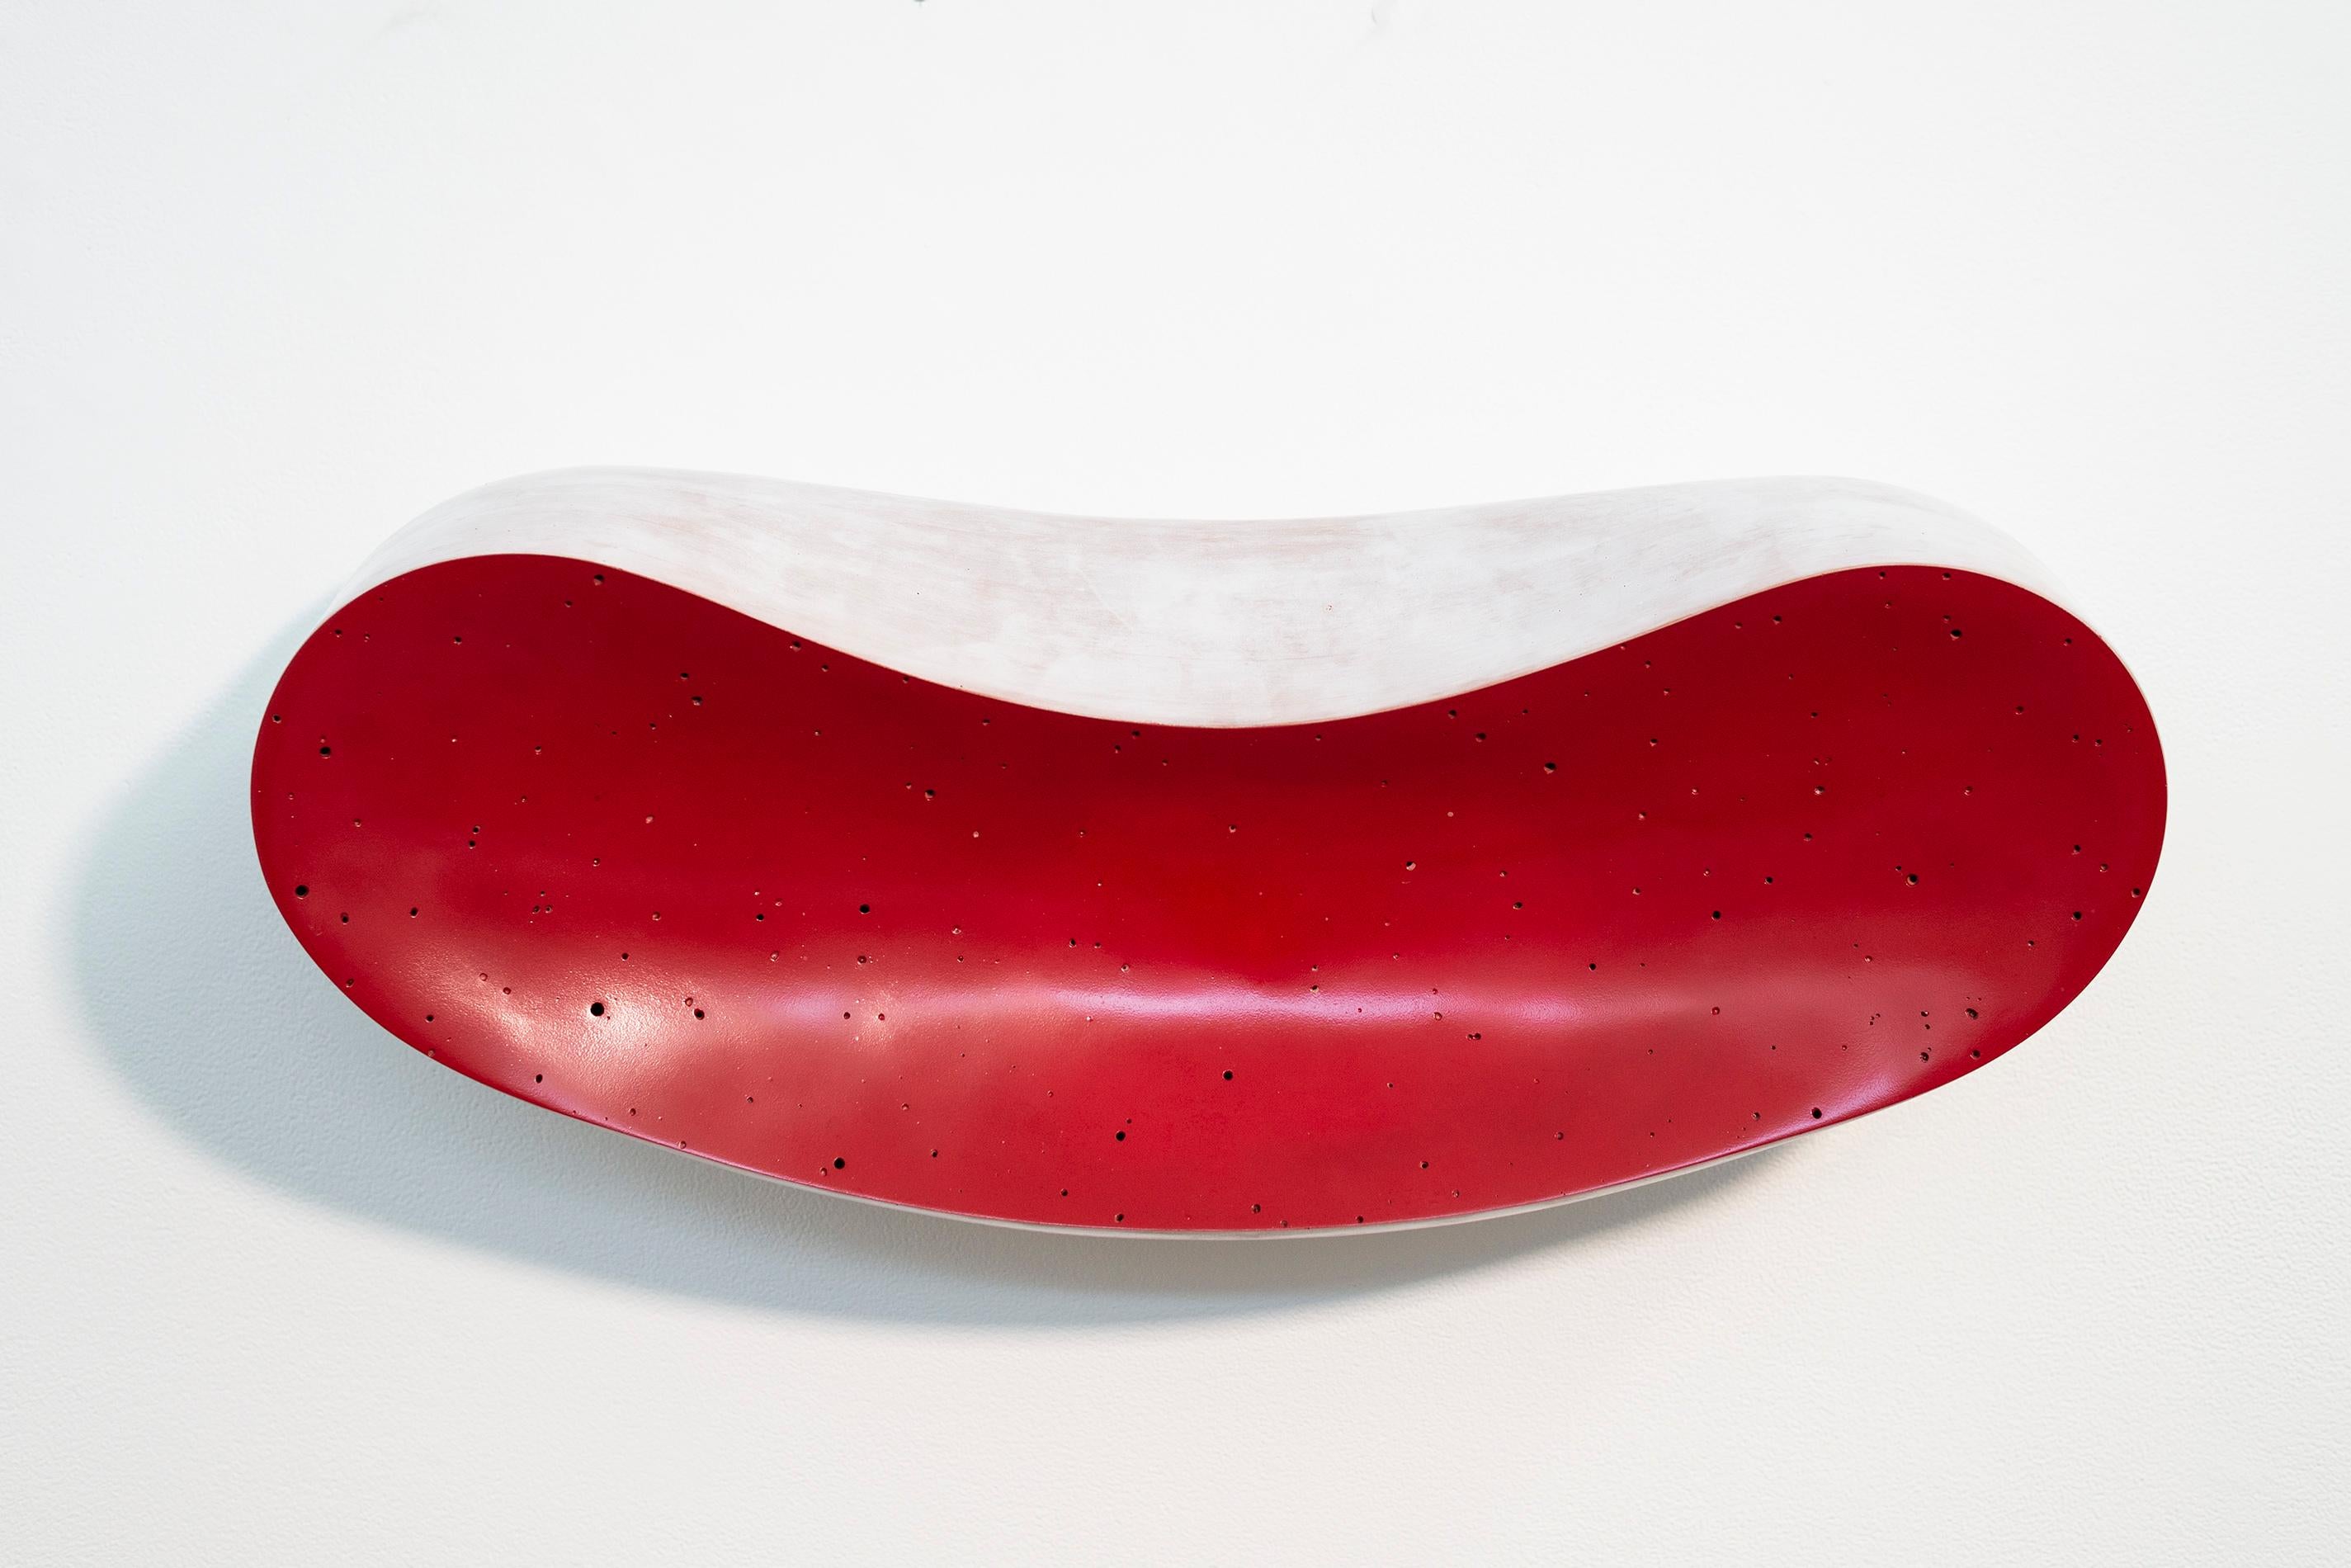 La Bouche - playful, red, white, abstract, elongated, ceramic wall sculpture For Sale 7